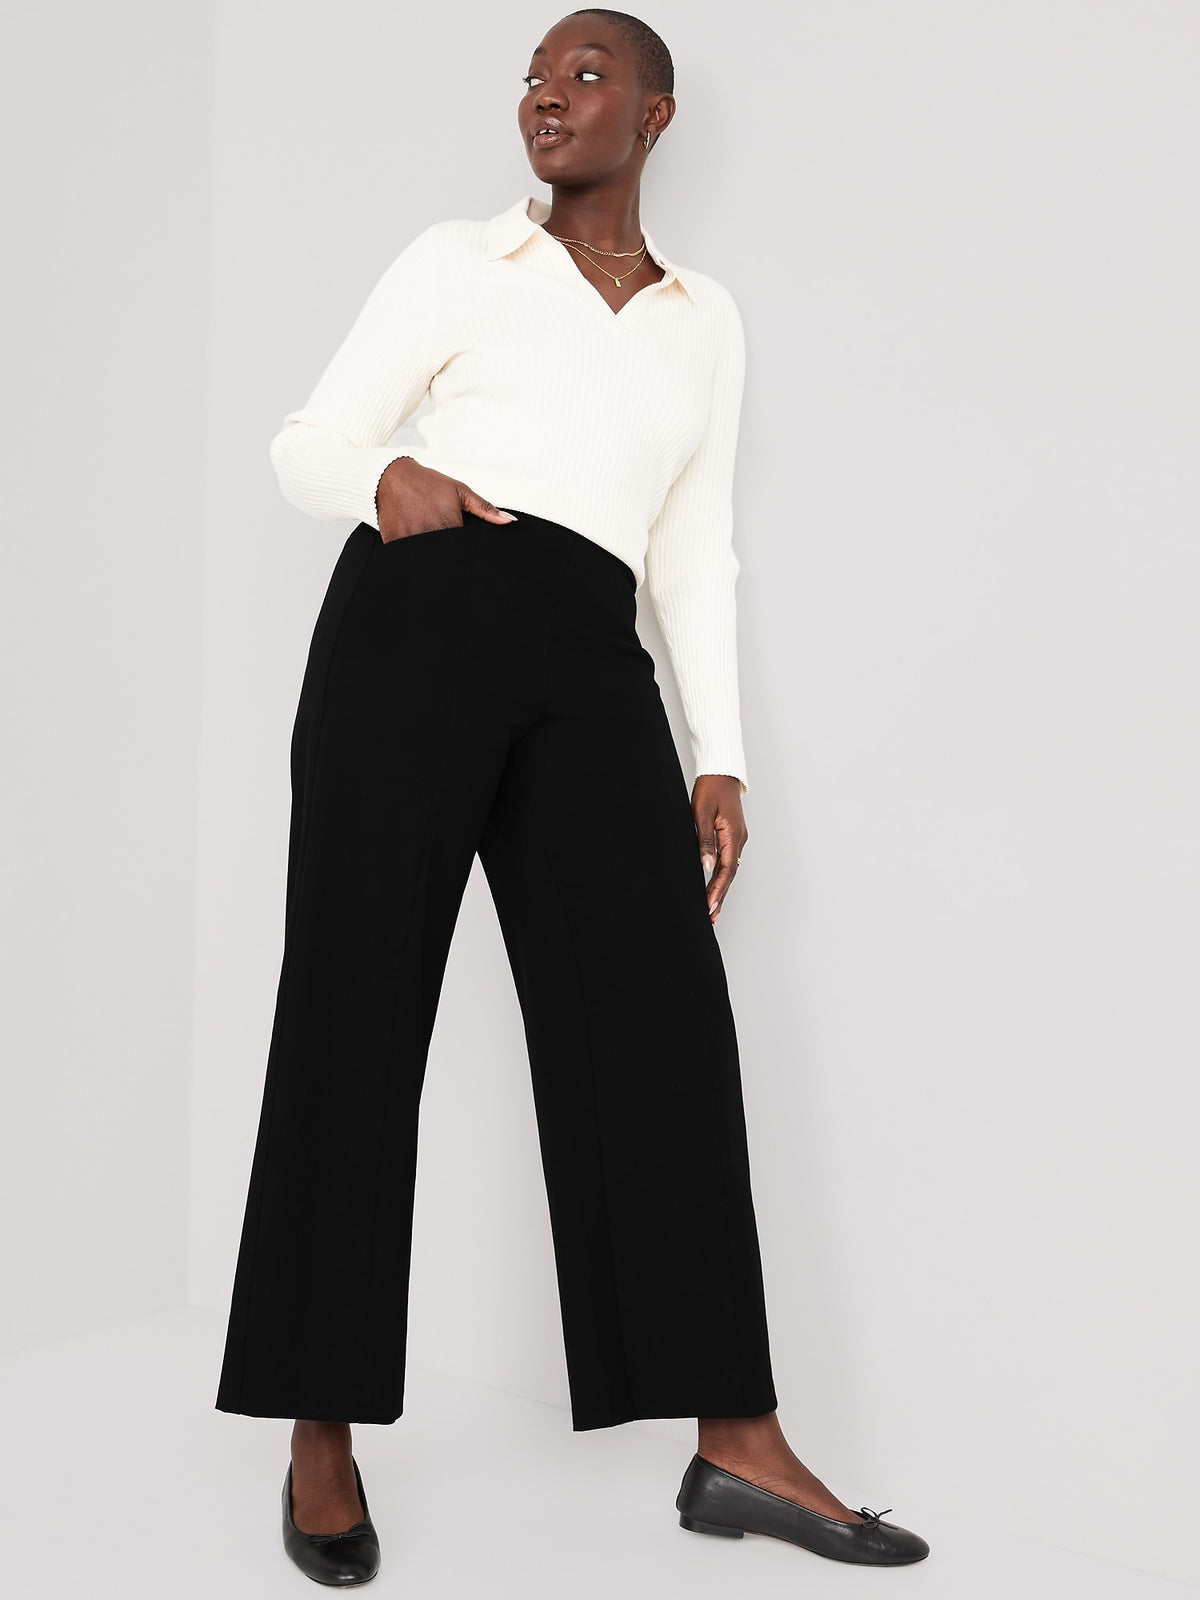 My Style // The Old Navy Pixie Pant - The Effortless Chic